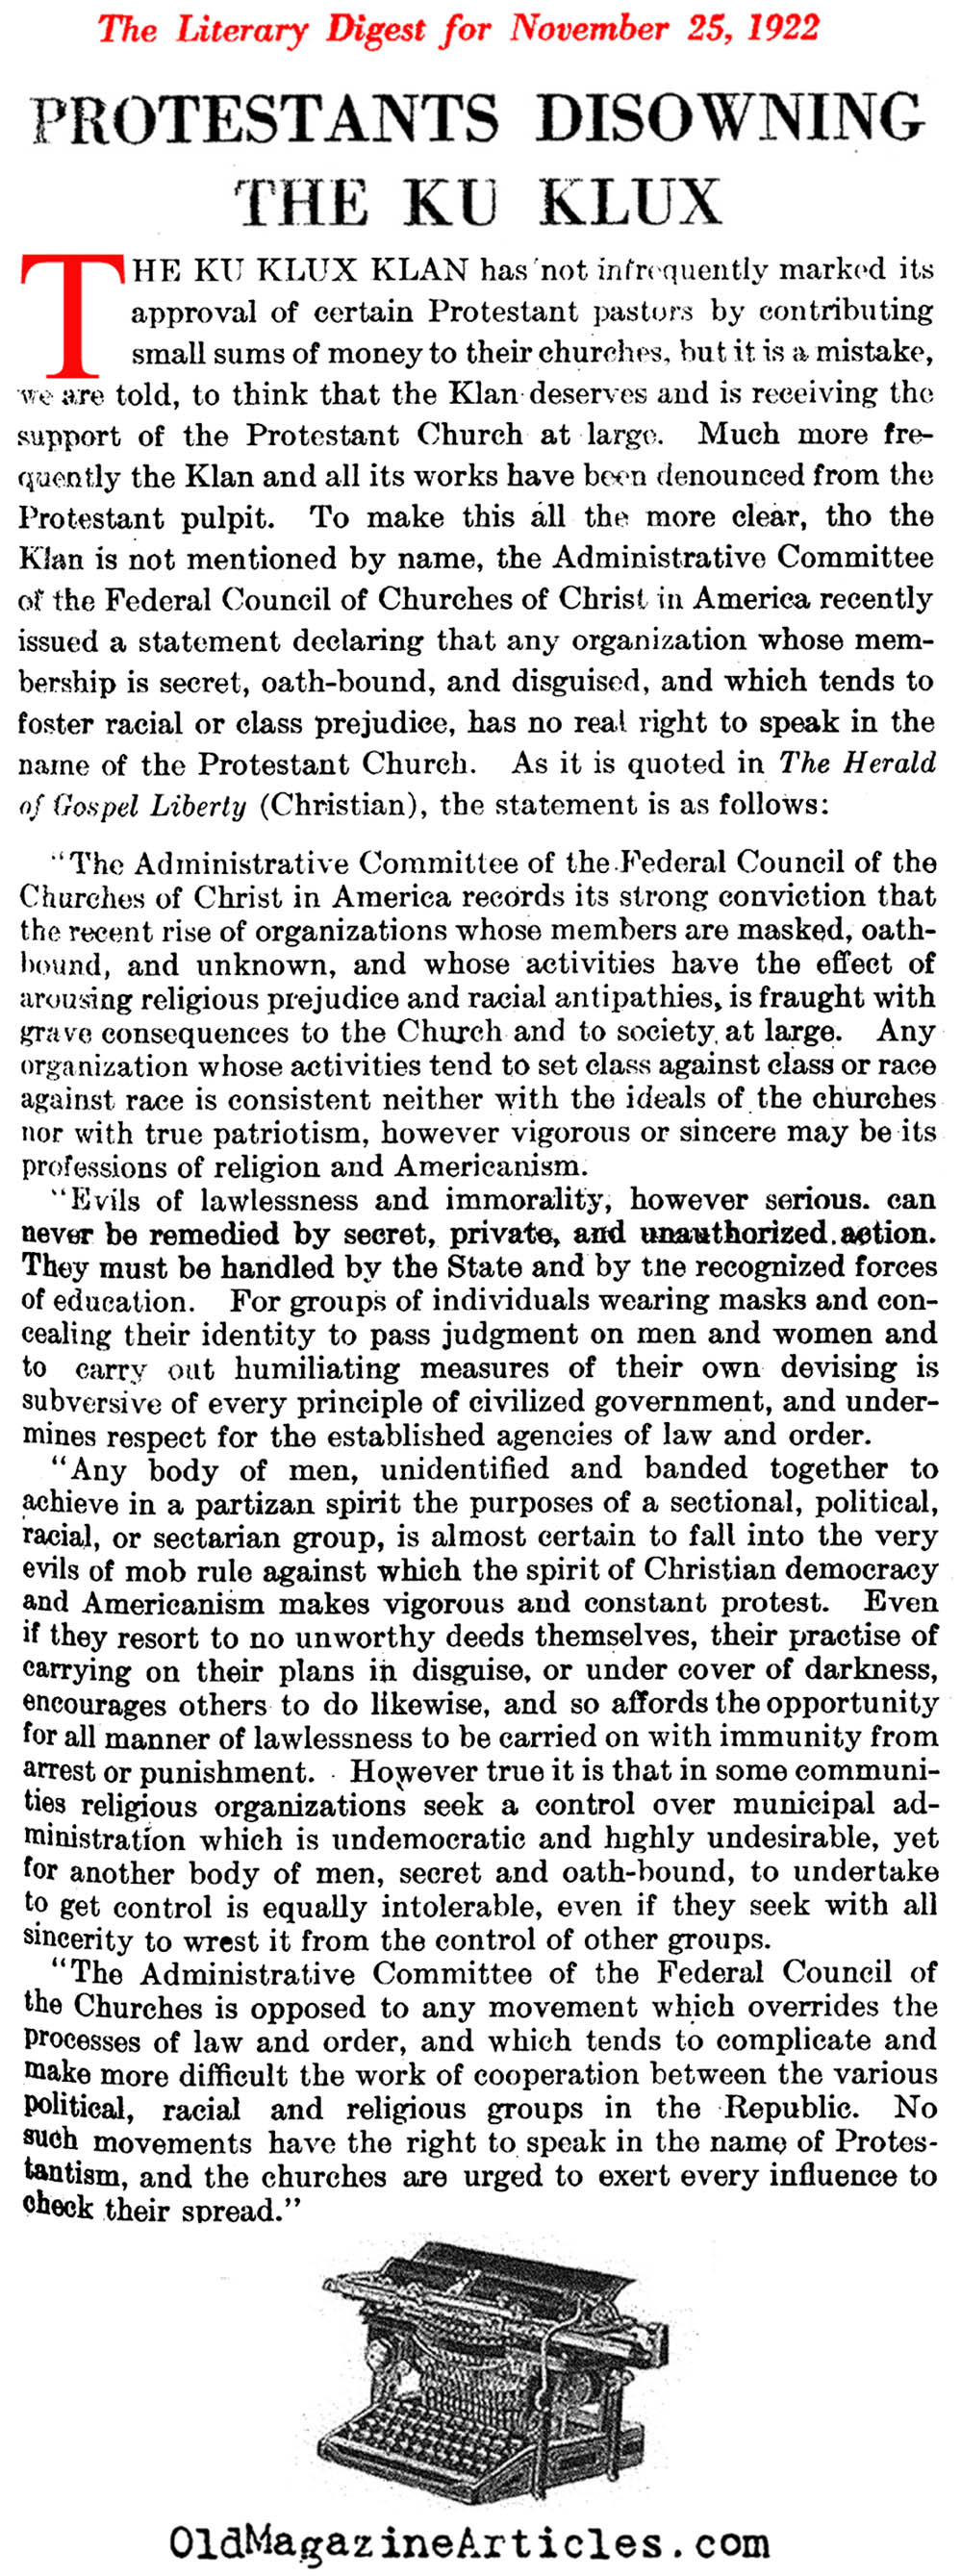 Protestant Churches Condemn the KKK (The Literary Digest, 1922)